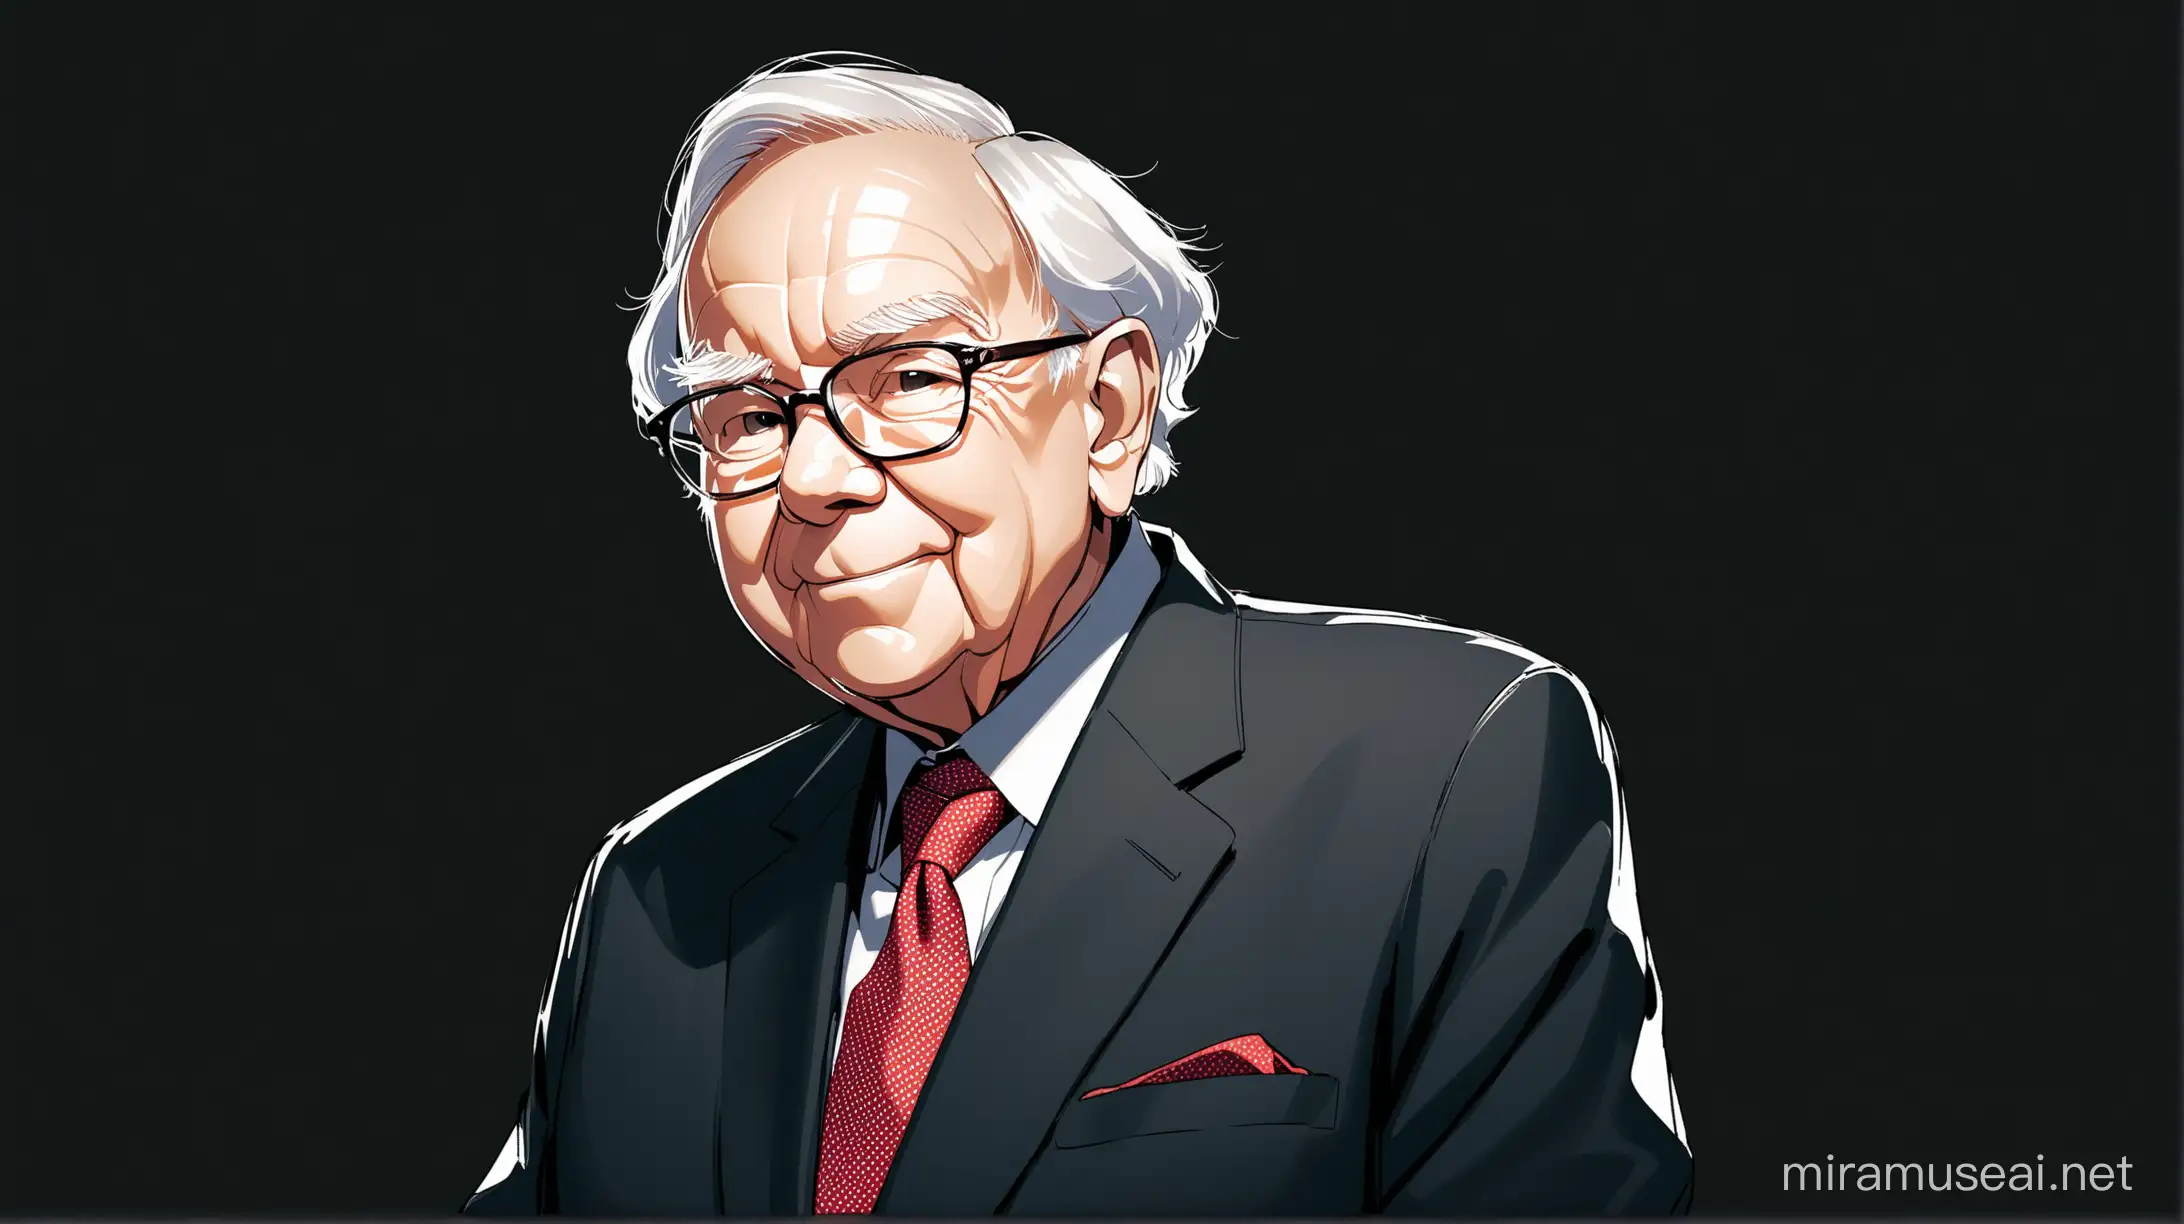 warren buffett advising on becoming rich with black colour background.